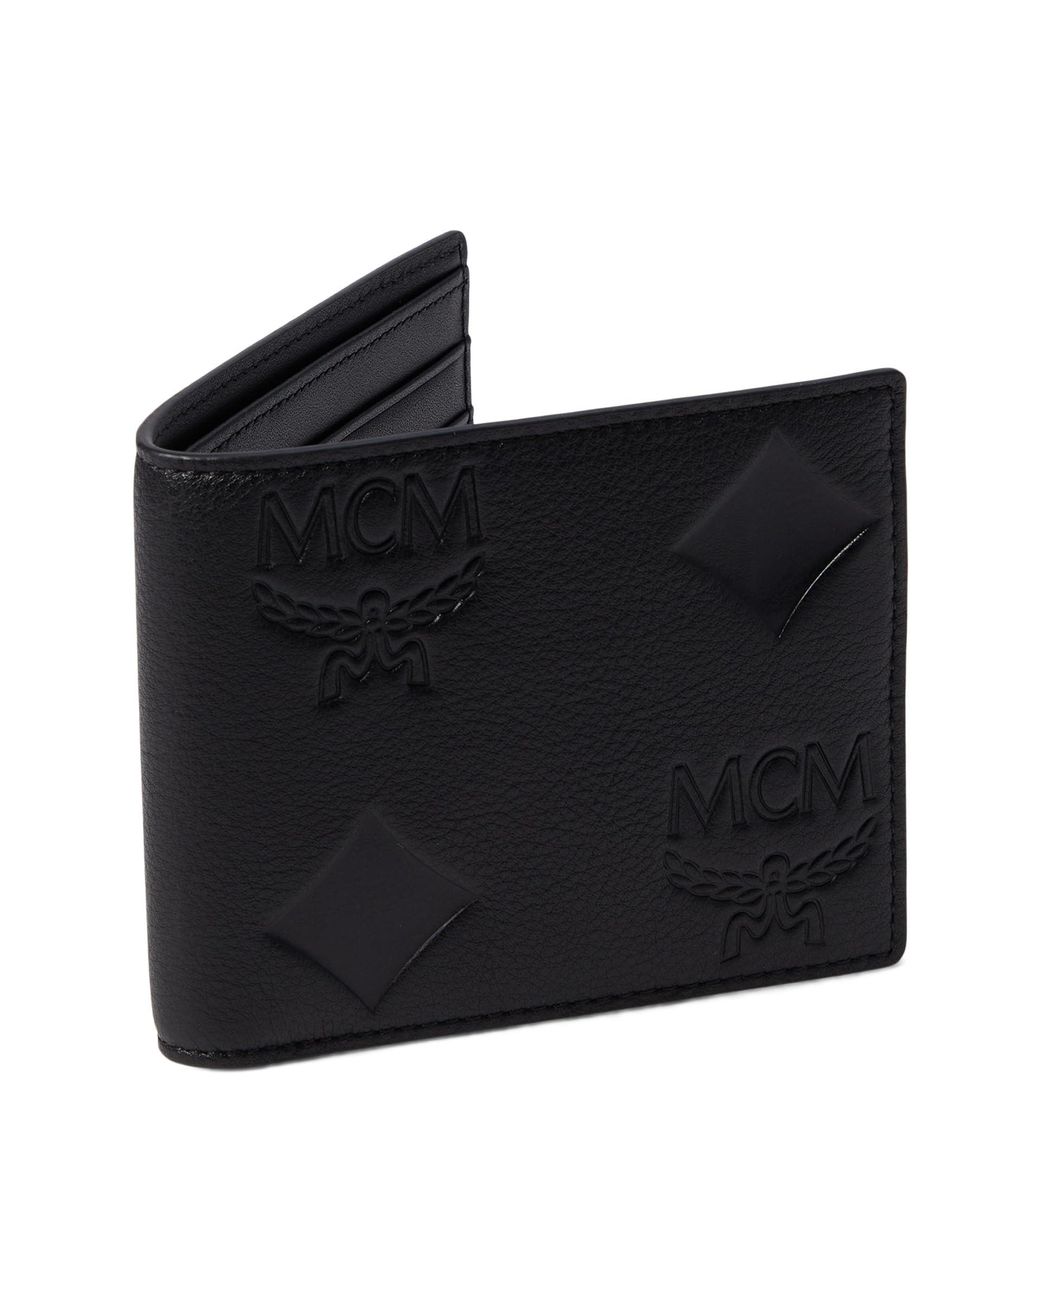 MCM Aren Emblem Maxi Monogrammed Leather Small Wallet in Black | Lyst